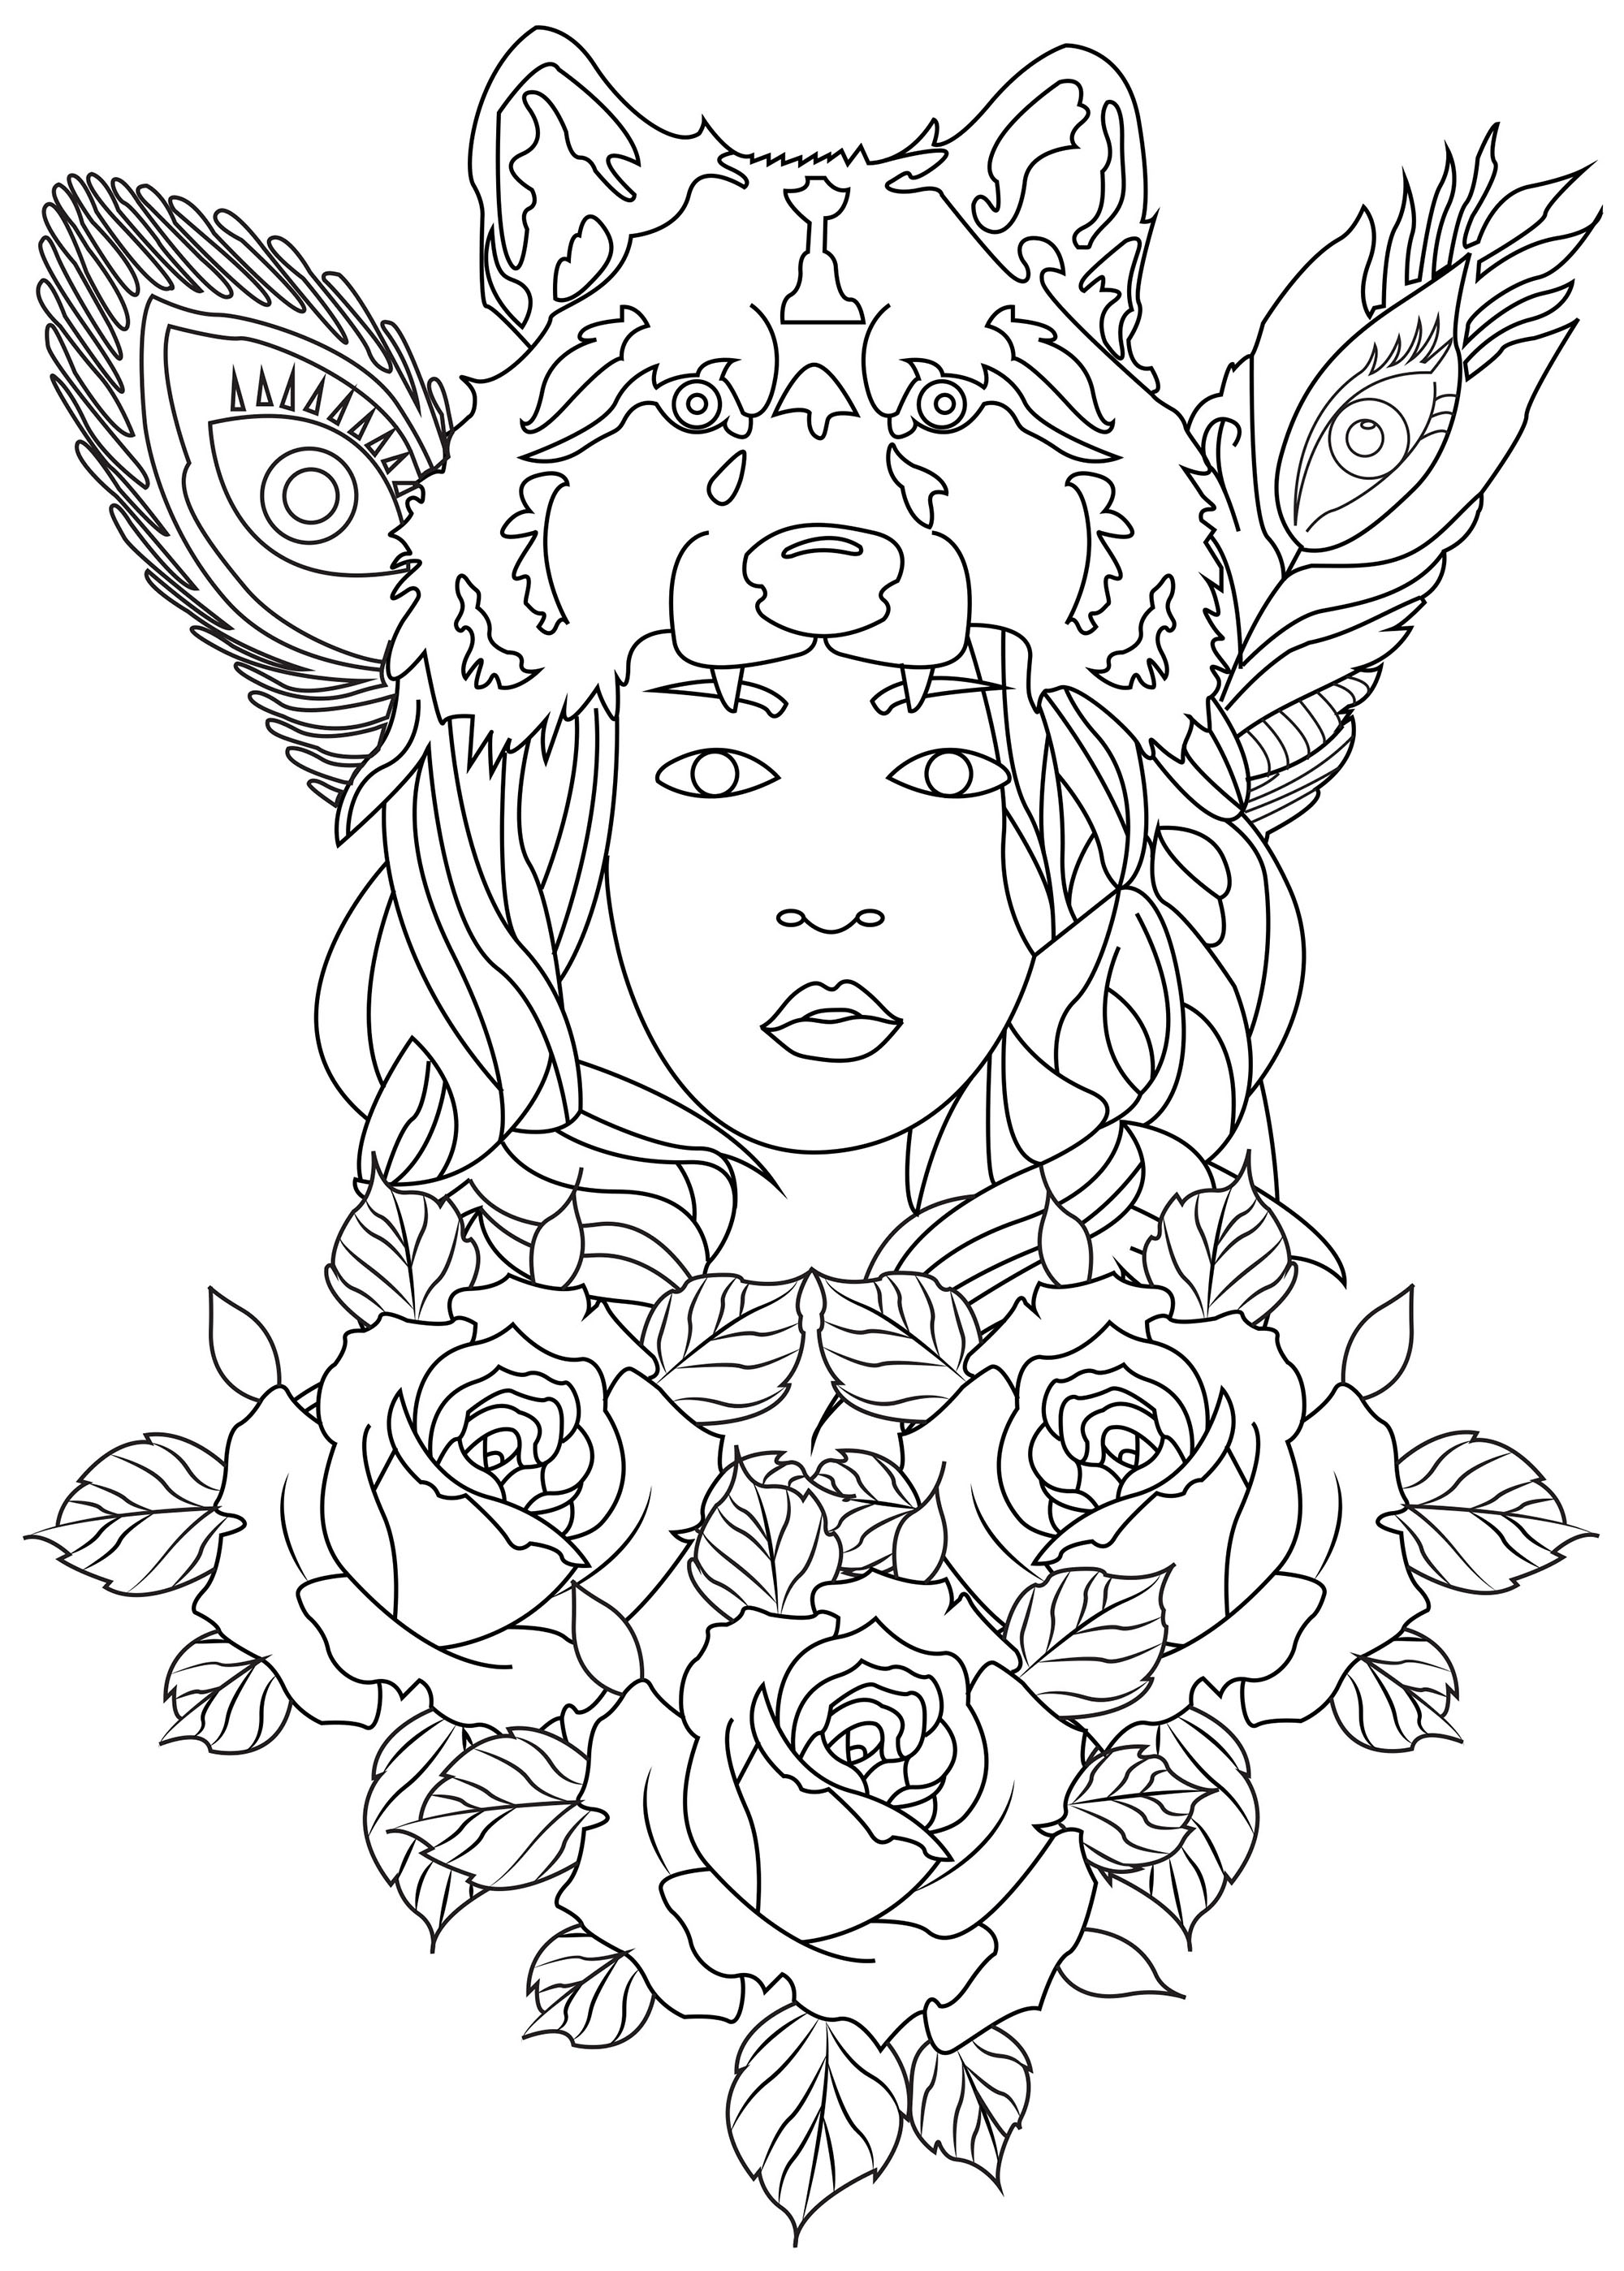 Download Rose Coloring Pages For Adults